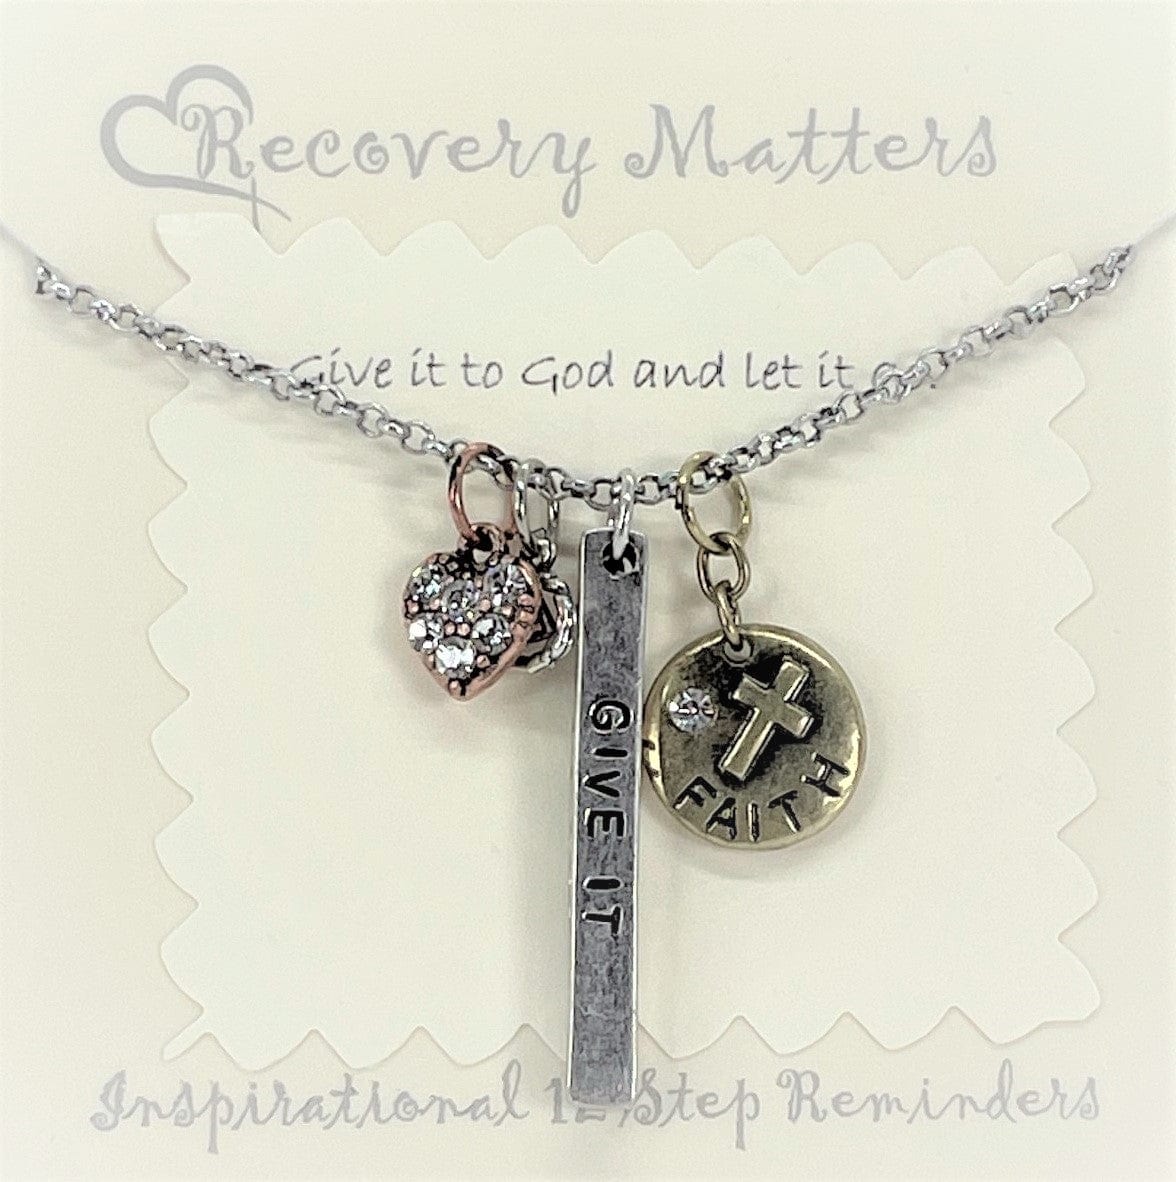 Alcoholics Anonymous "Give It To God" Bar Necklace By Recovery Matters